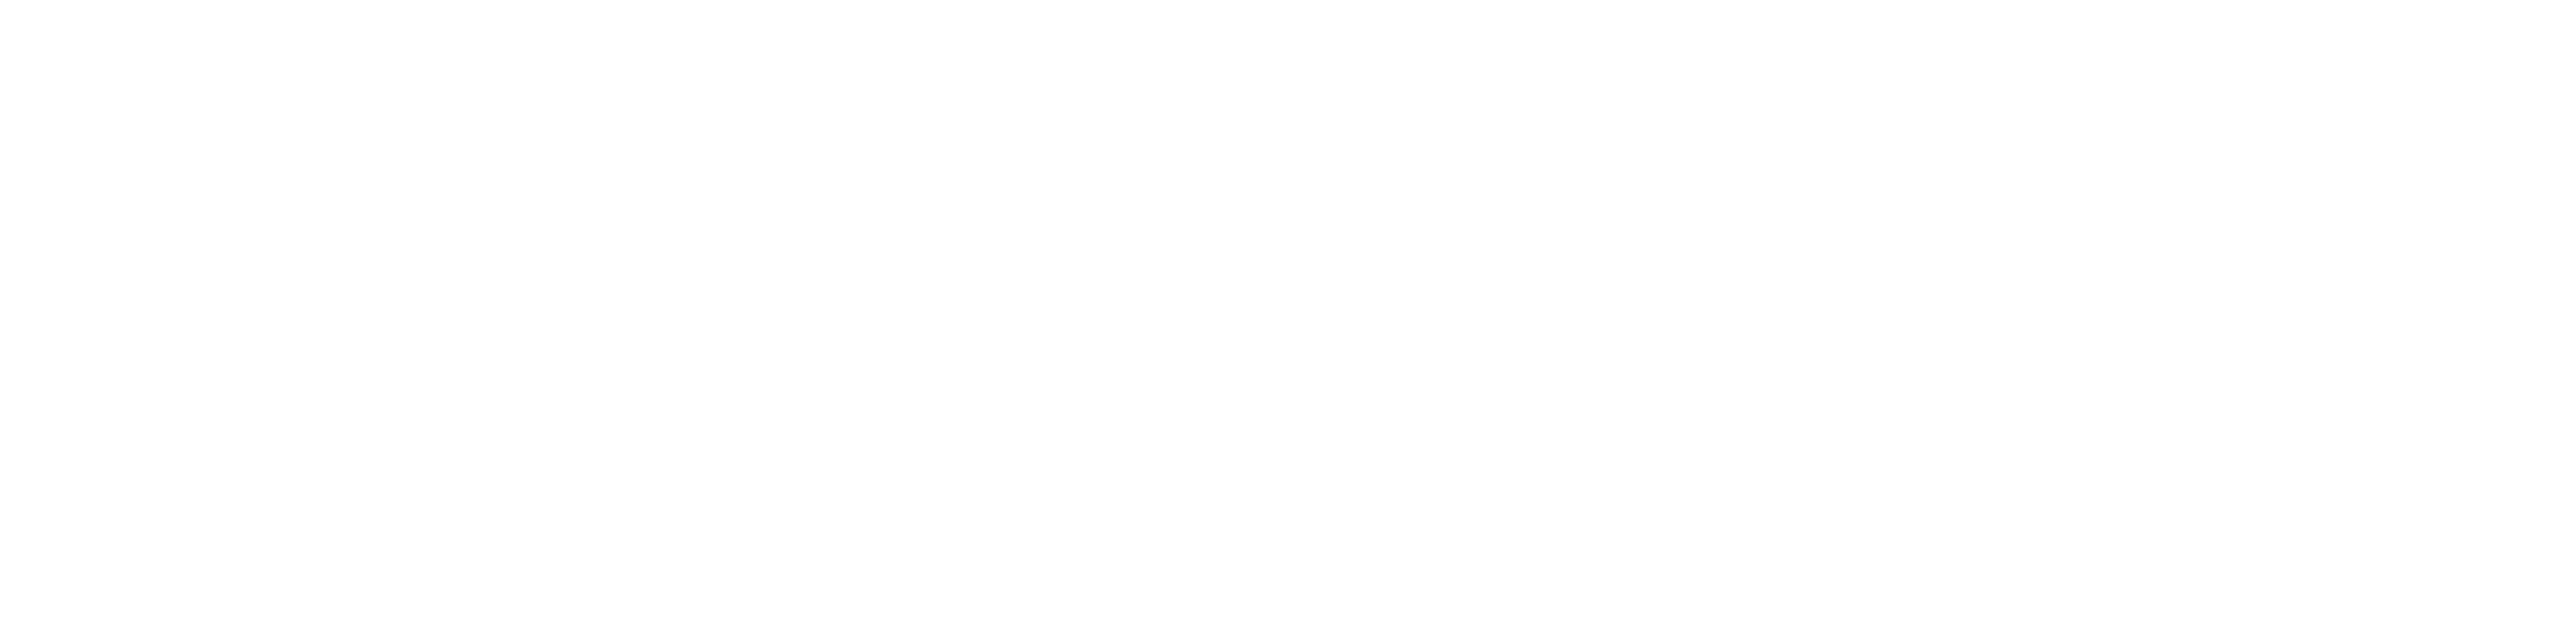 X-Files Logo - The Smart Home Turns On Scully. The X Files